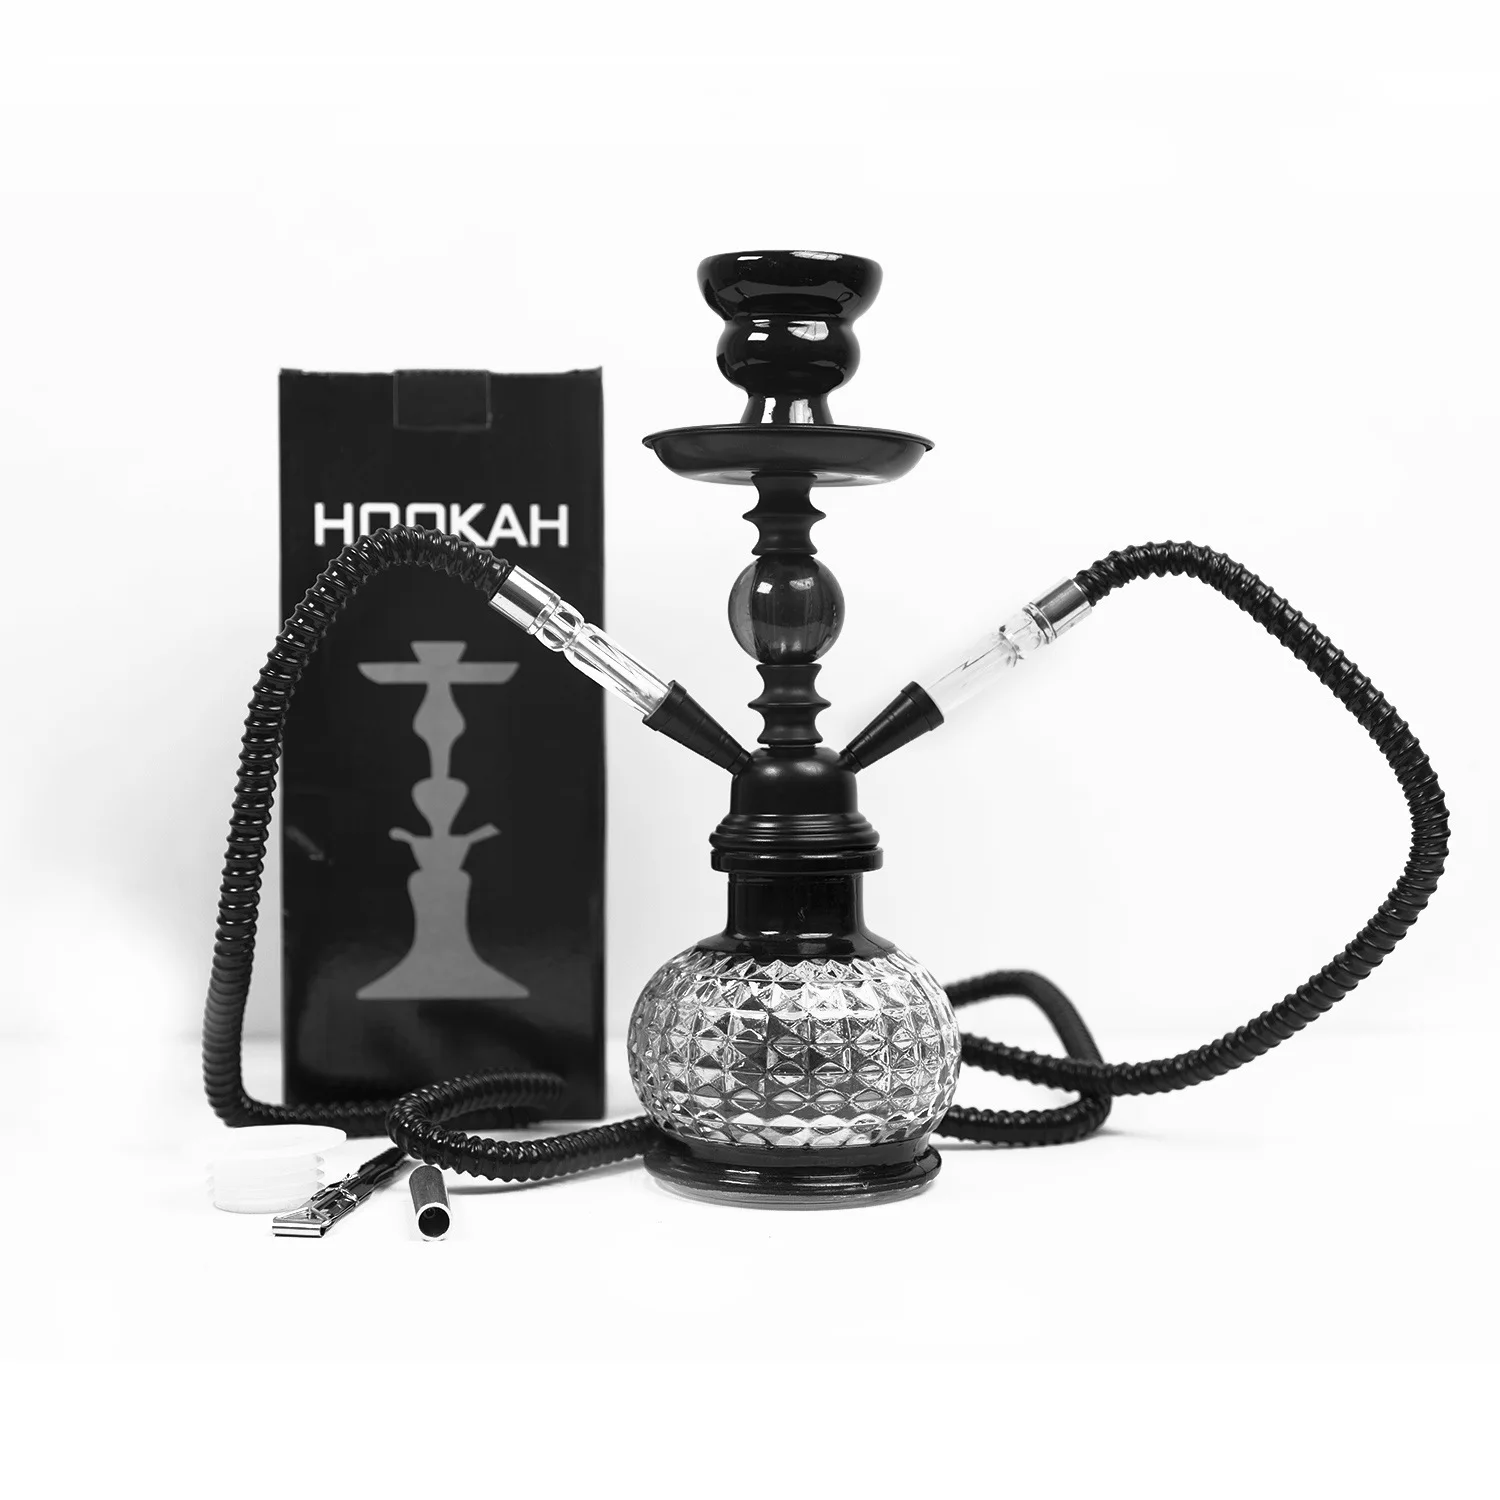 

Hookah Kit Portable 11" Premium 2 Hose Shisha Complete Set, with Hookah Accessories Narguile Completo Smoking Accessories